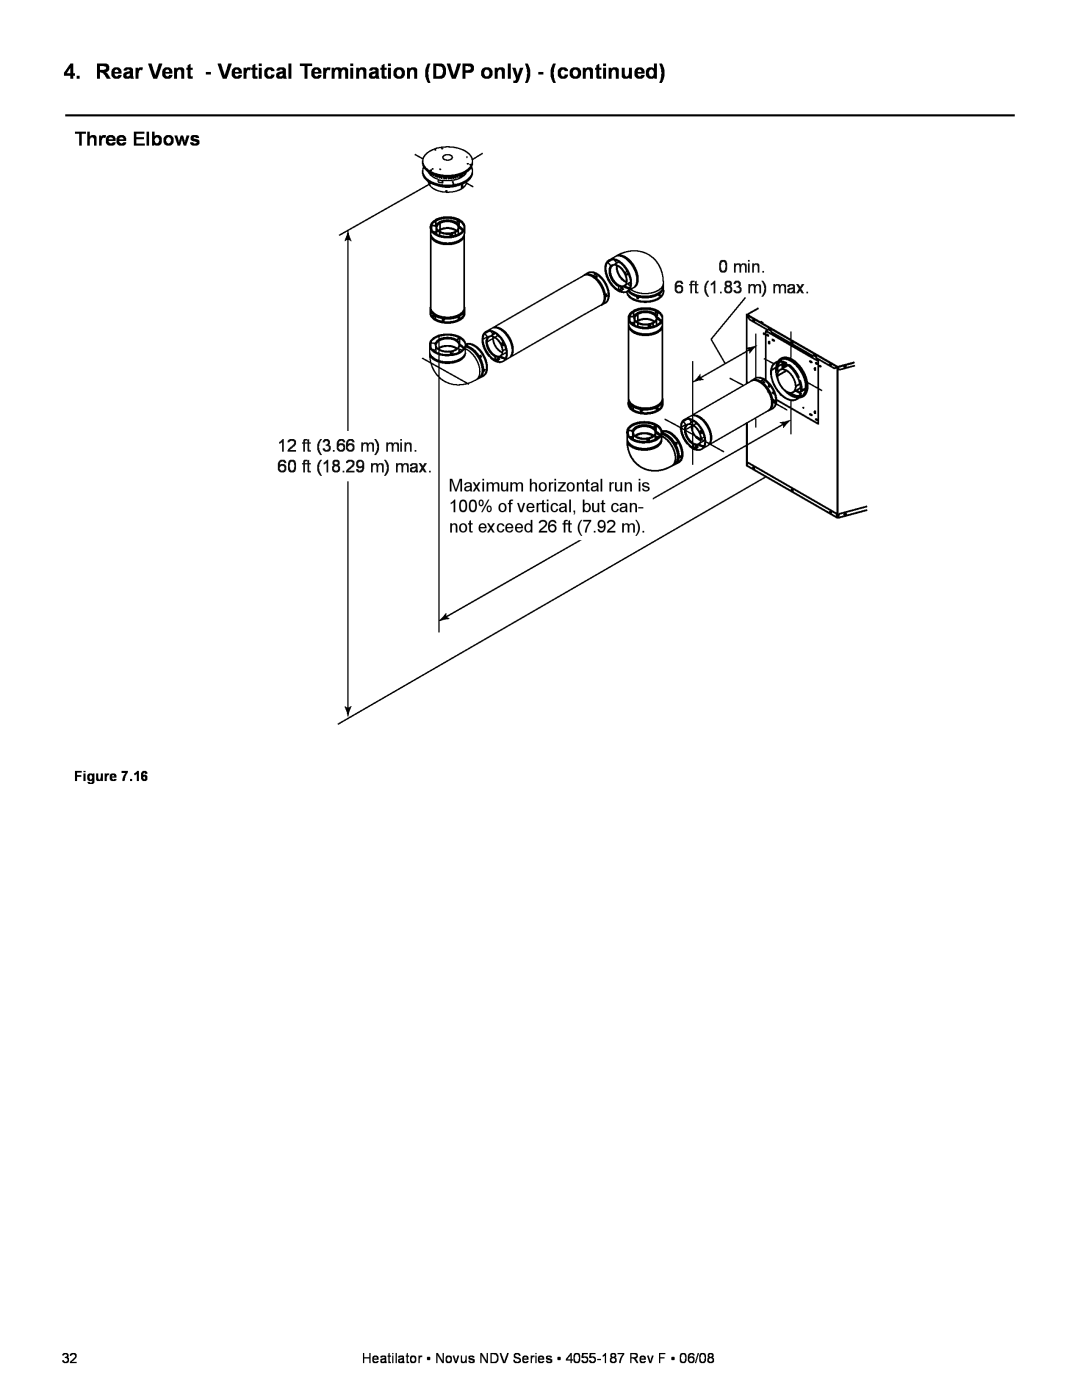 Hearth and Home Technologies NDV4236IL, NDV3630 Rear Vent - Vertical Termination DVP only - continued, Three Elbows 